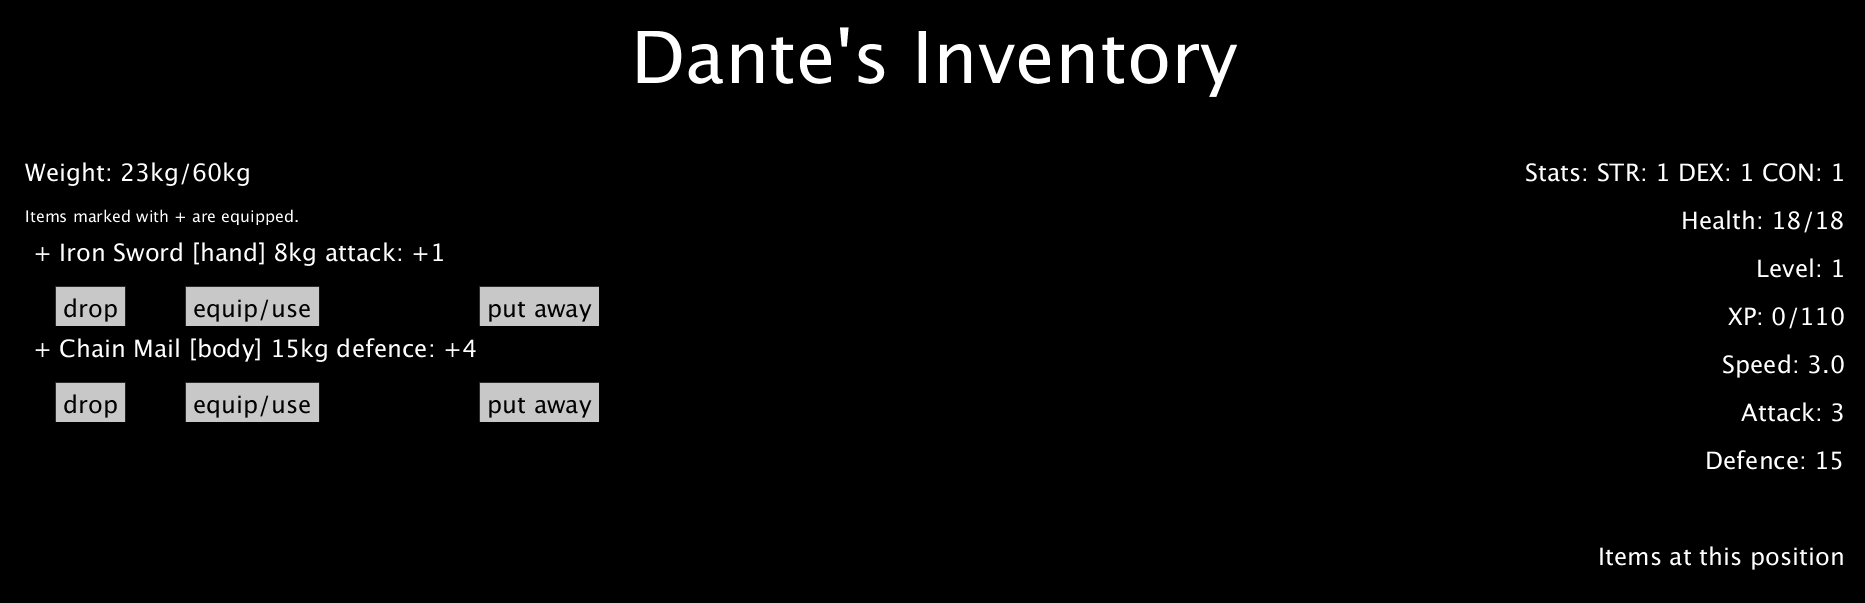 The character Dante opens their inventory.